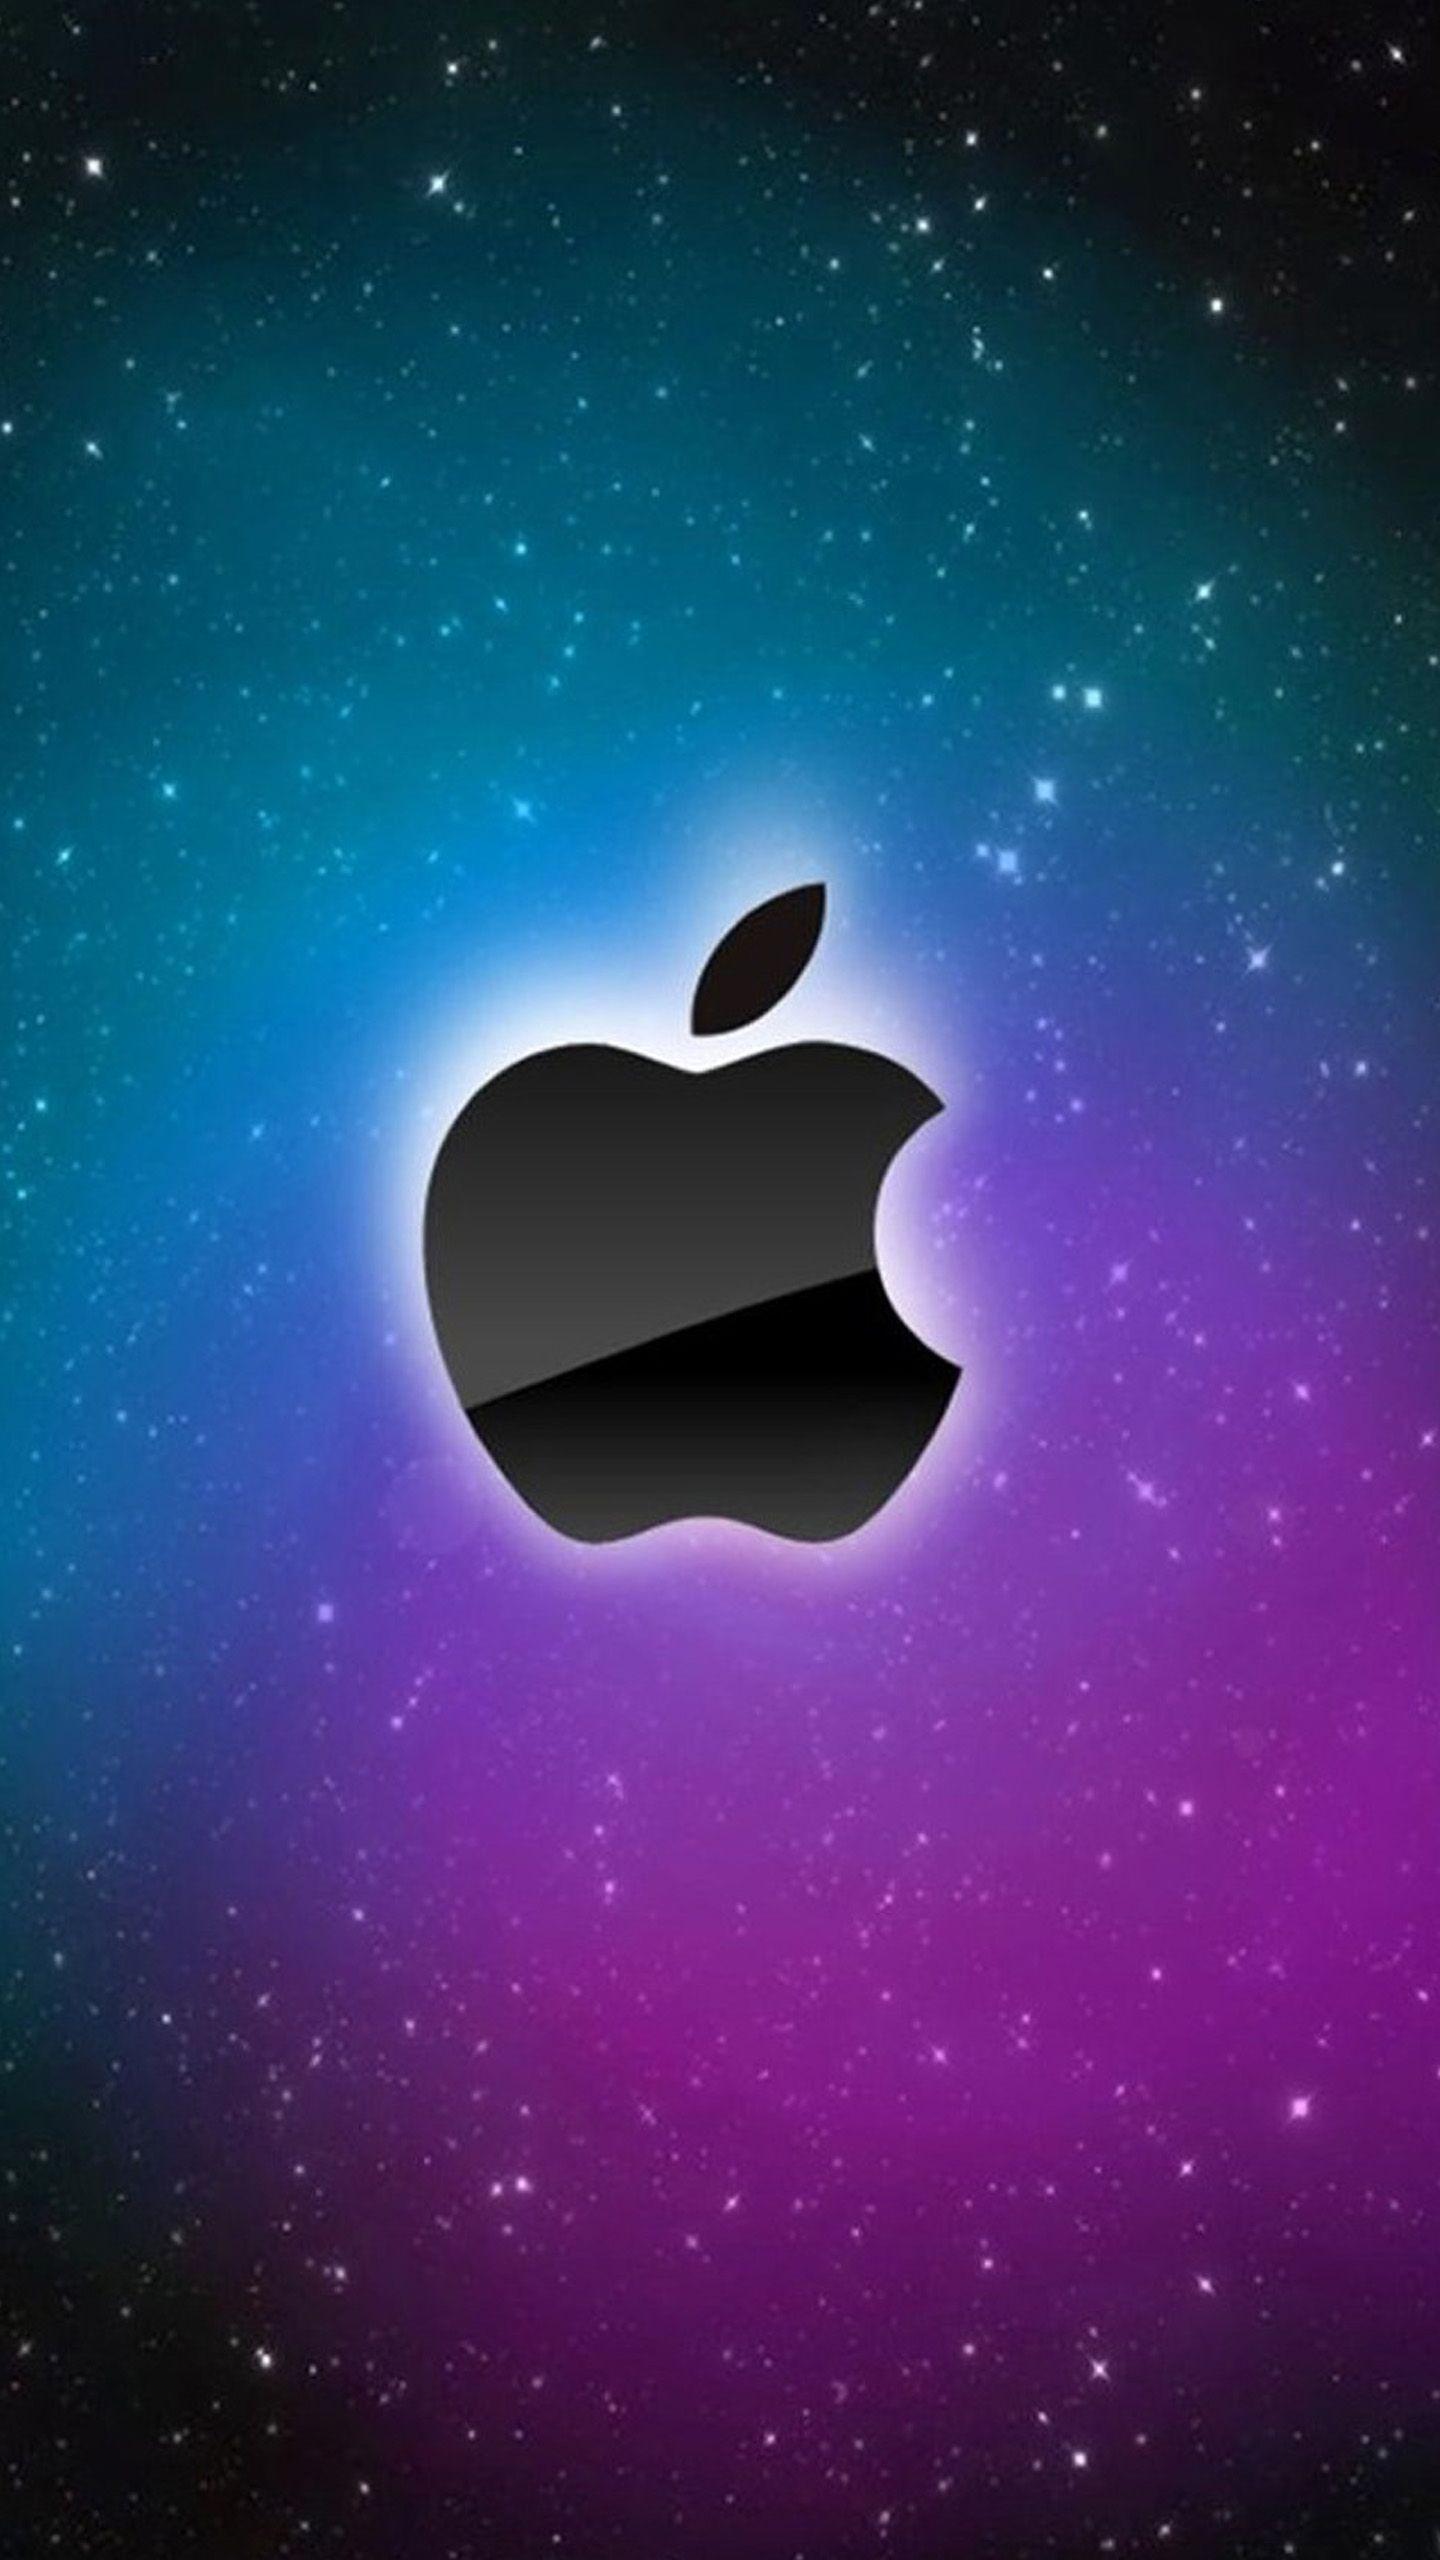 Galxay Apple Logo - Awesome Apple logo 5 Galaxy S6 Wallpaper | Galaxy S6 Wallpapers